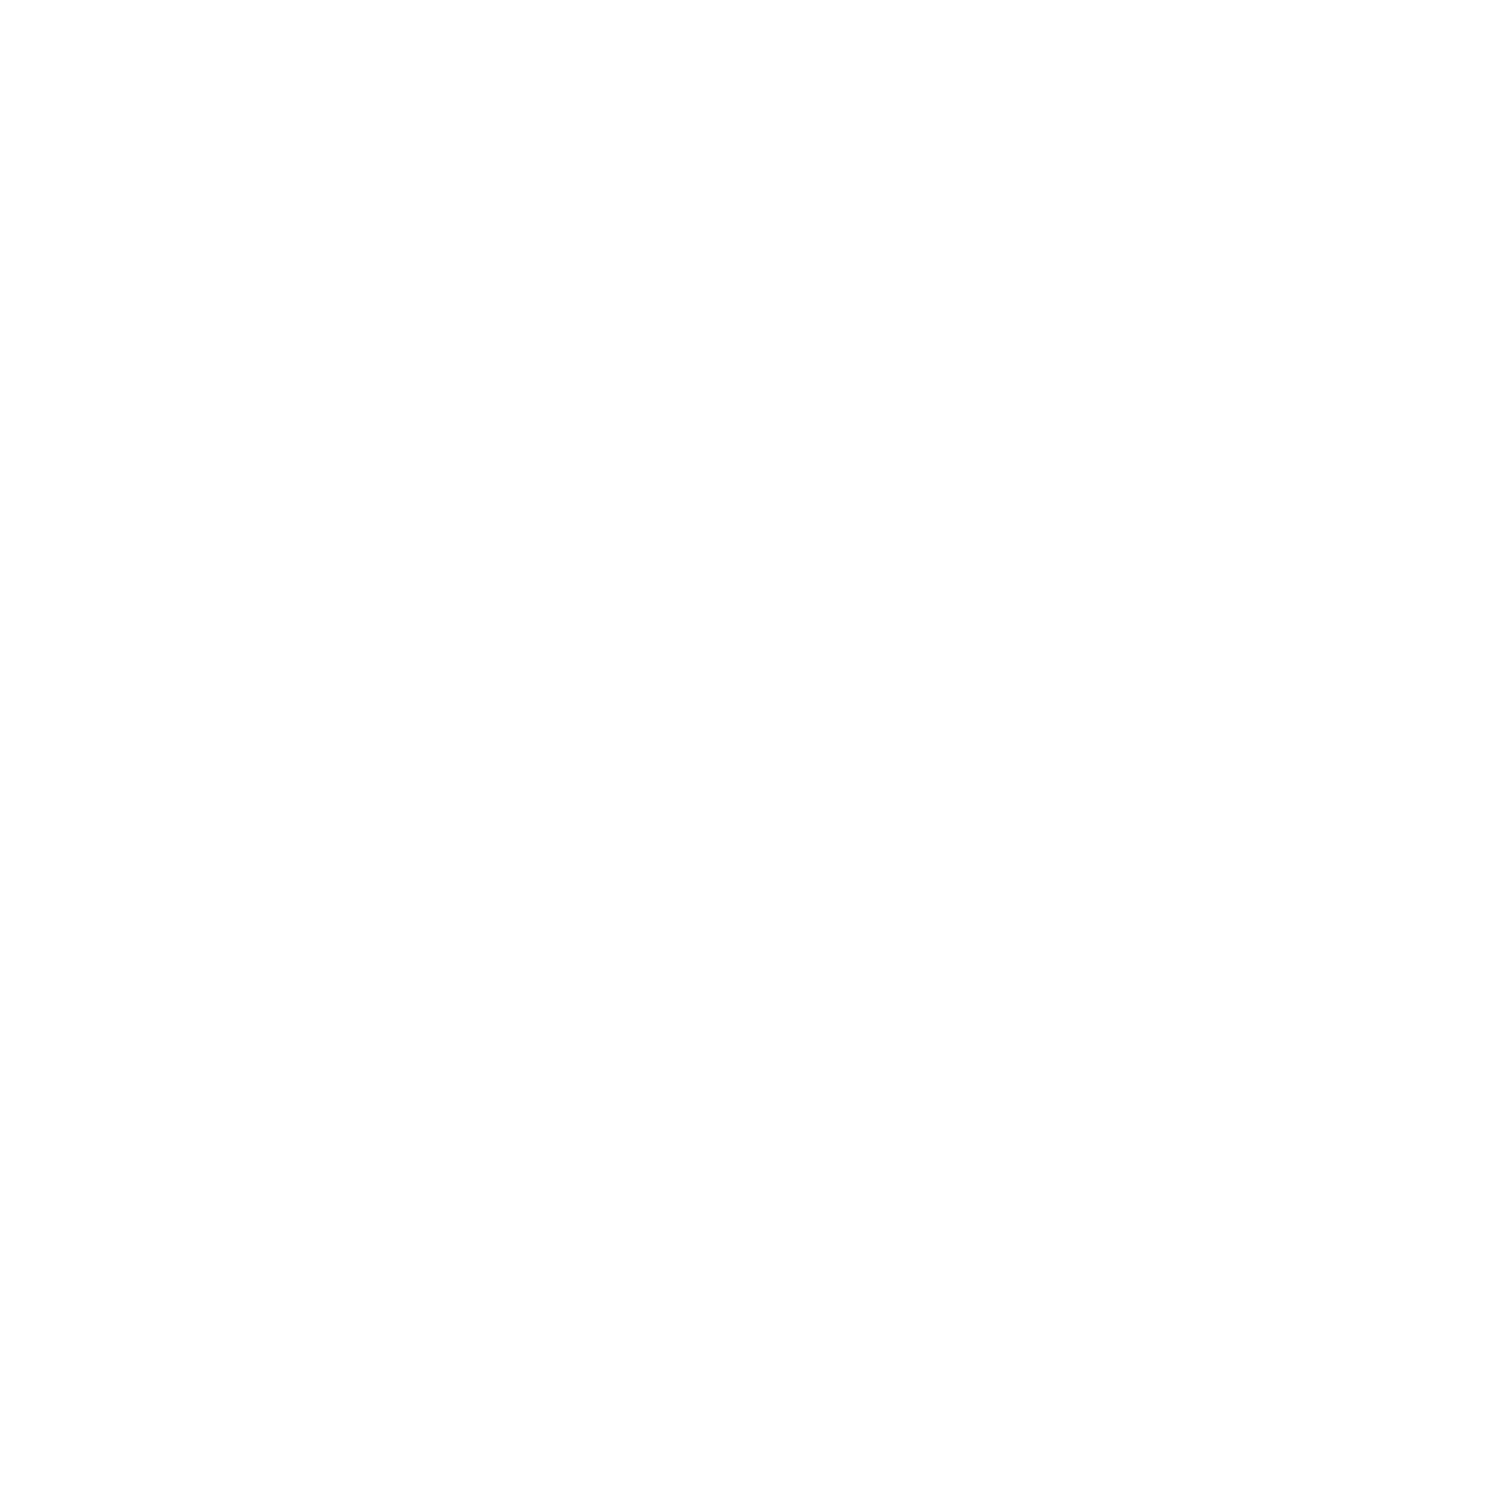 Anew You Aesthetics and Med Spa logo